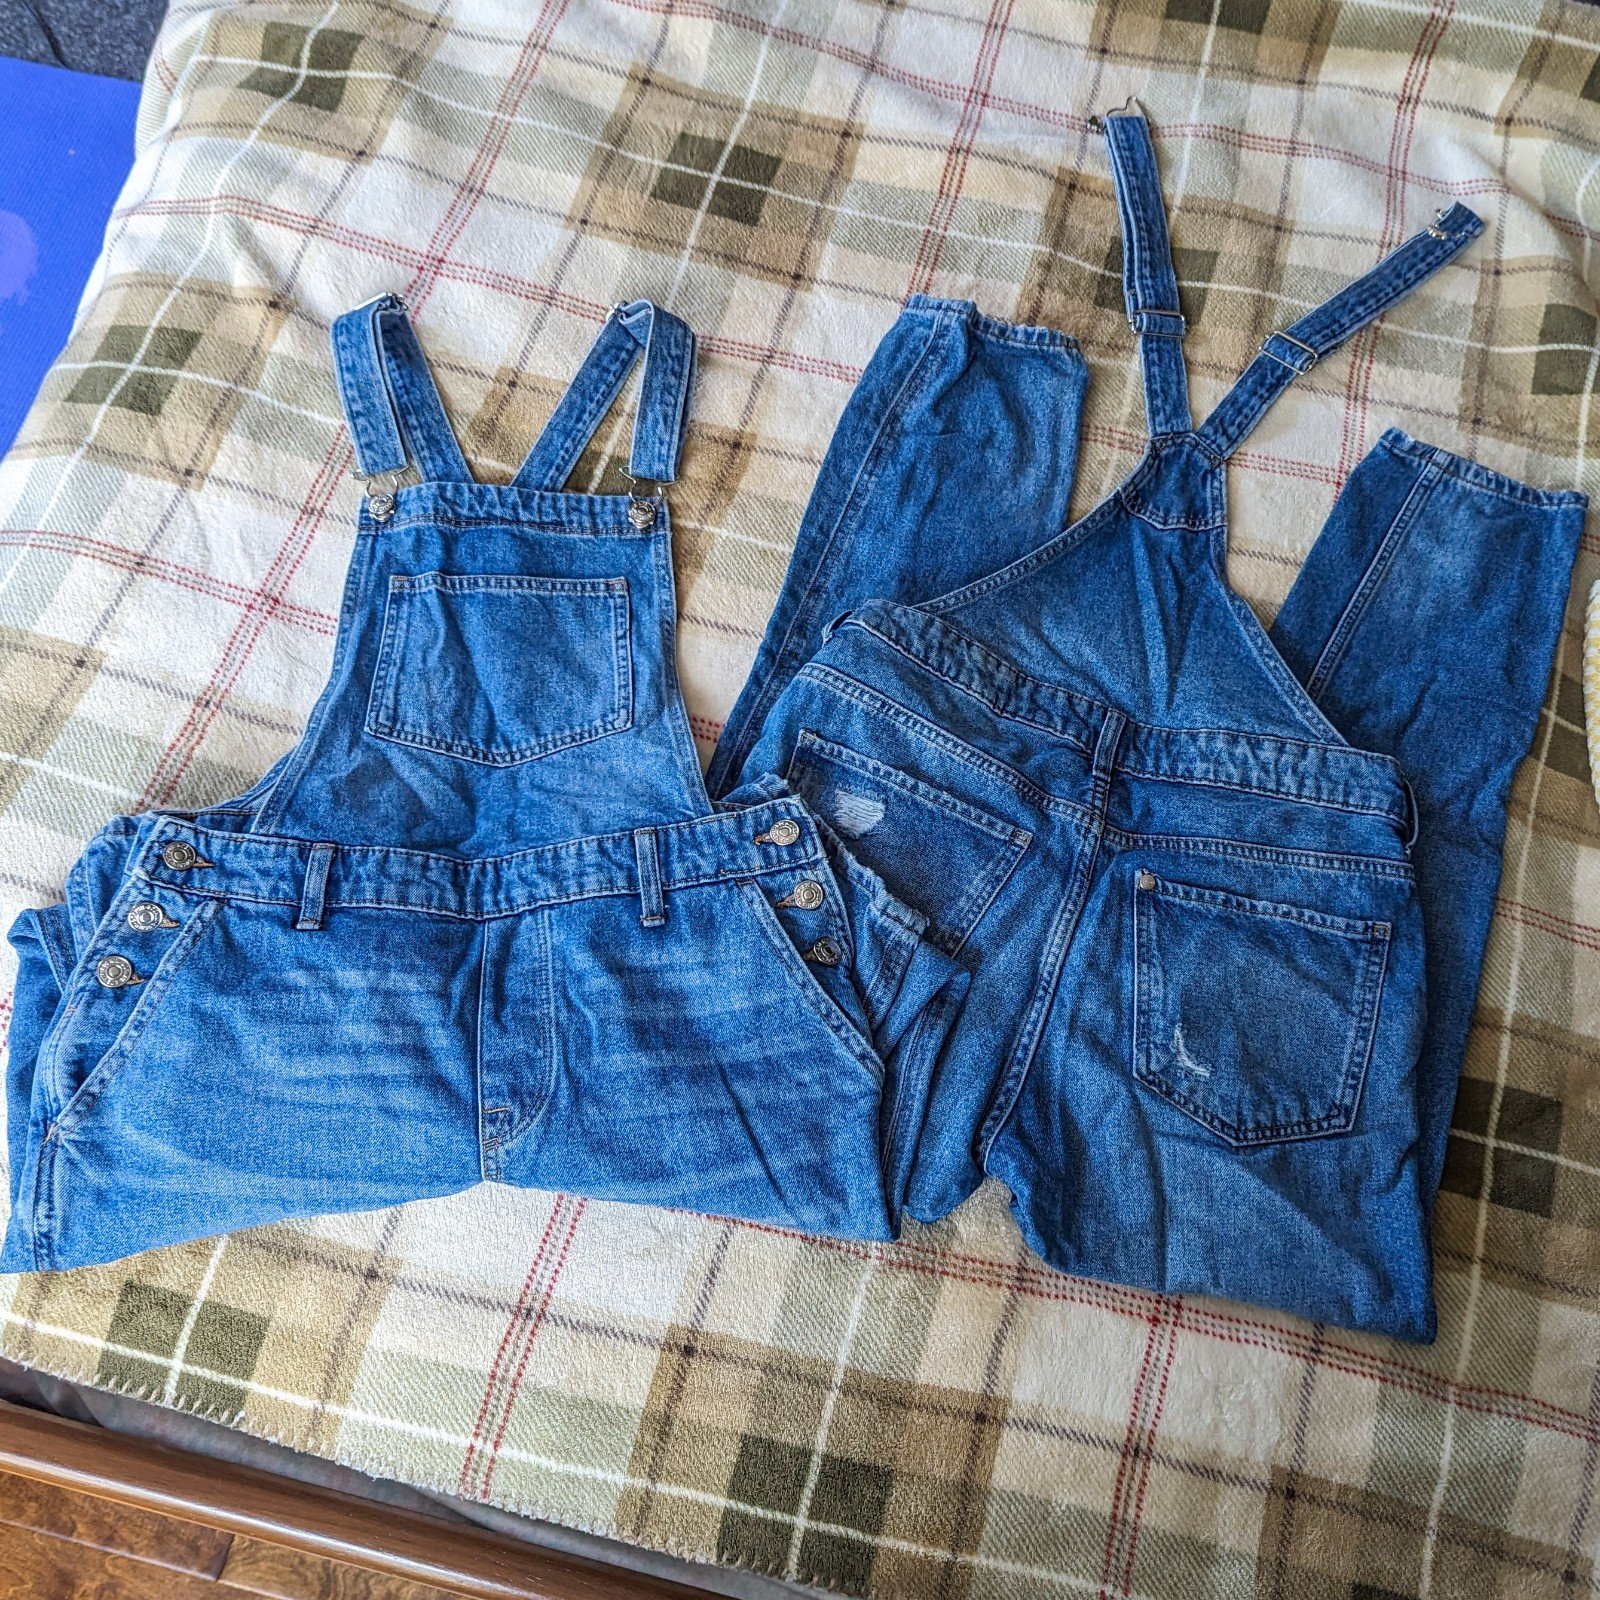 Personality 2 Pair H&M Denim Overalls, Size 2, Like New lTMGRttBO Factory Price